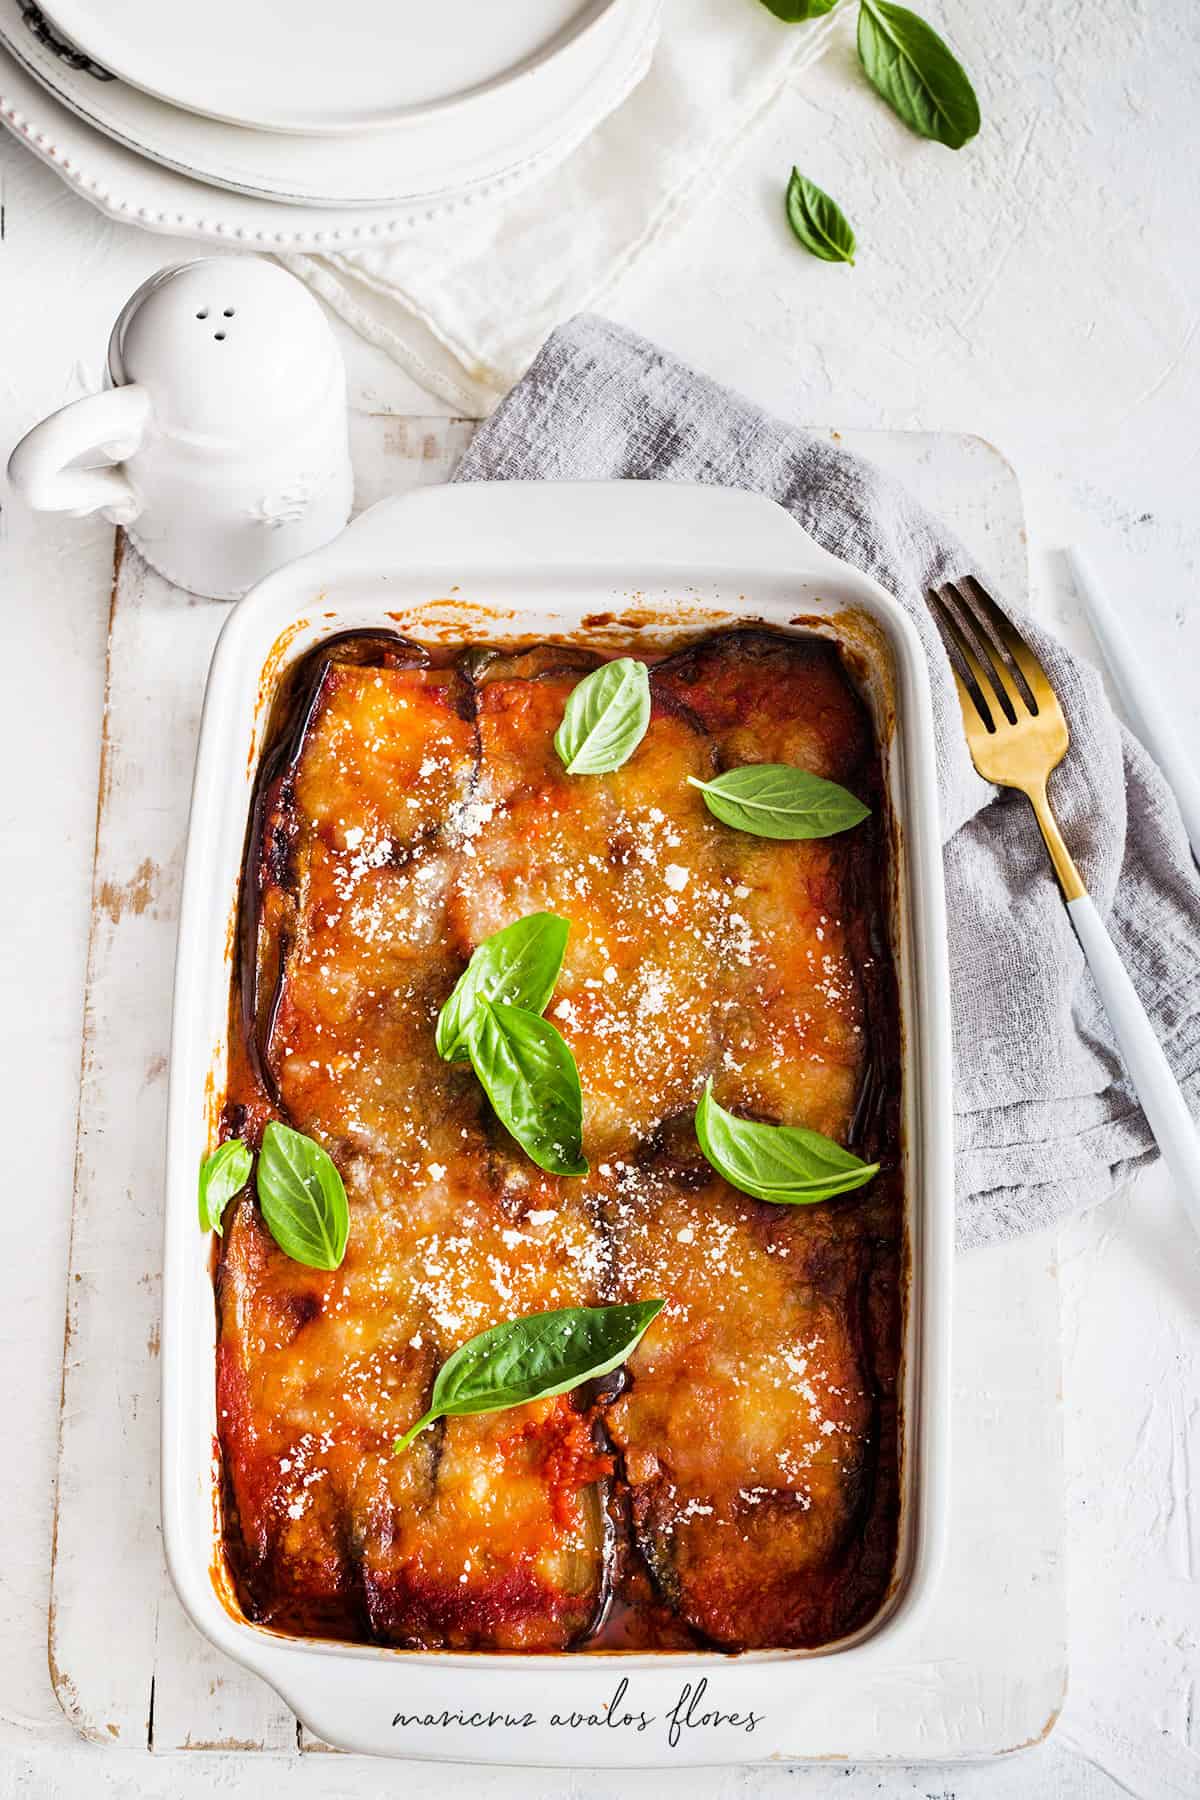 Melanzane alla Parmigiana in a baking dish. Seen from above.